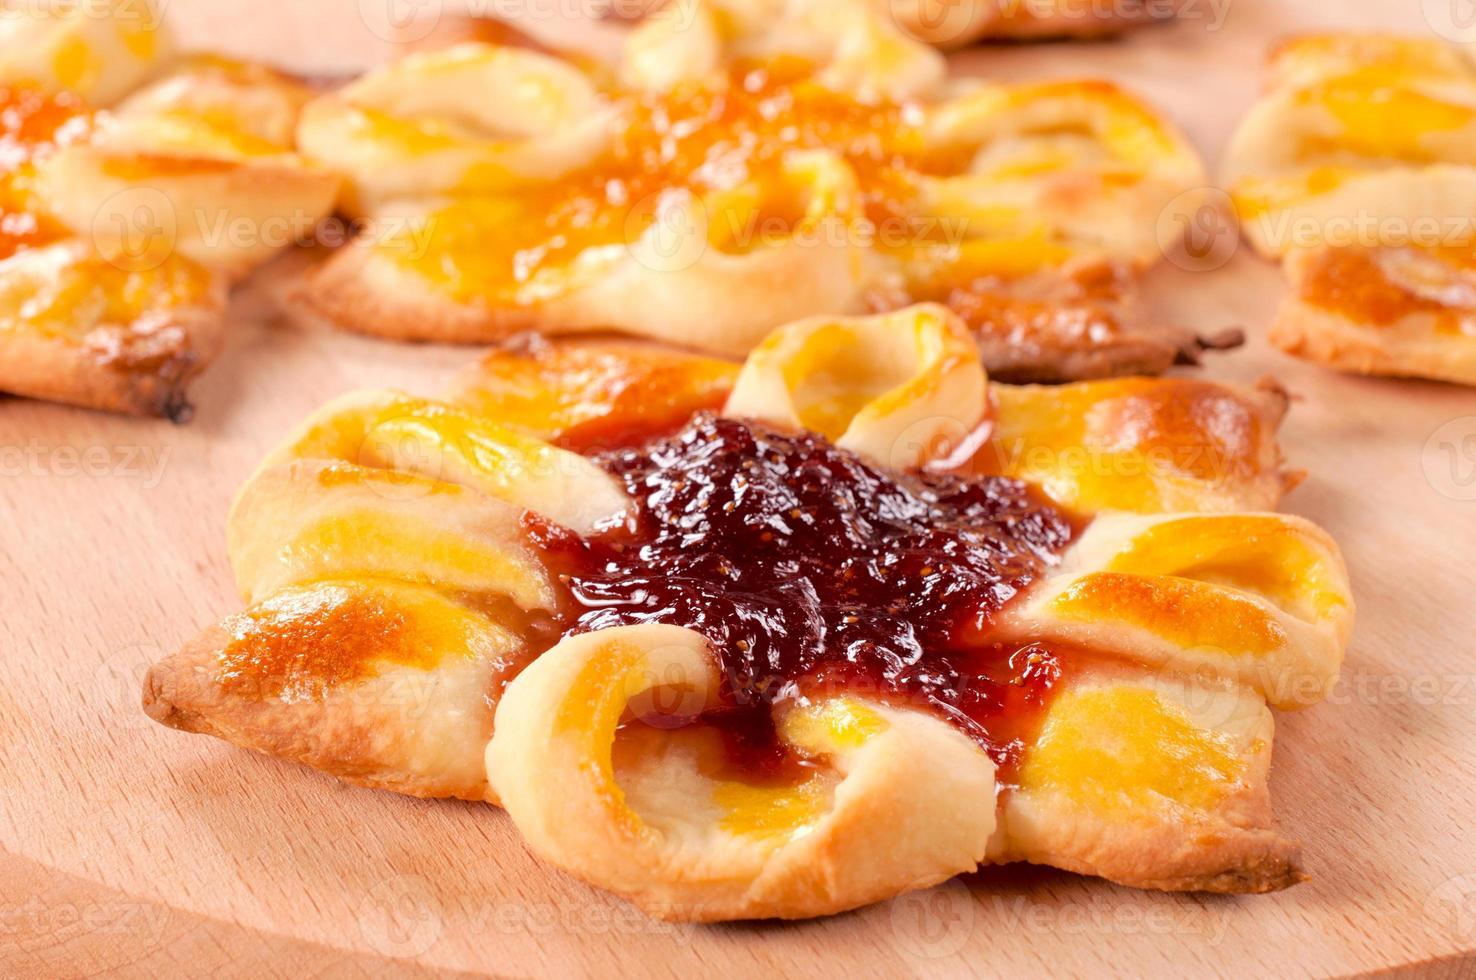 Sweet homemade pastry with jam photo